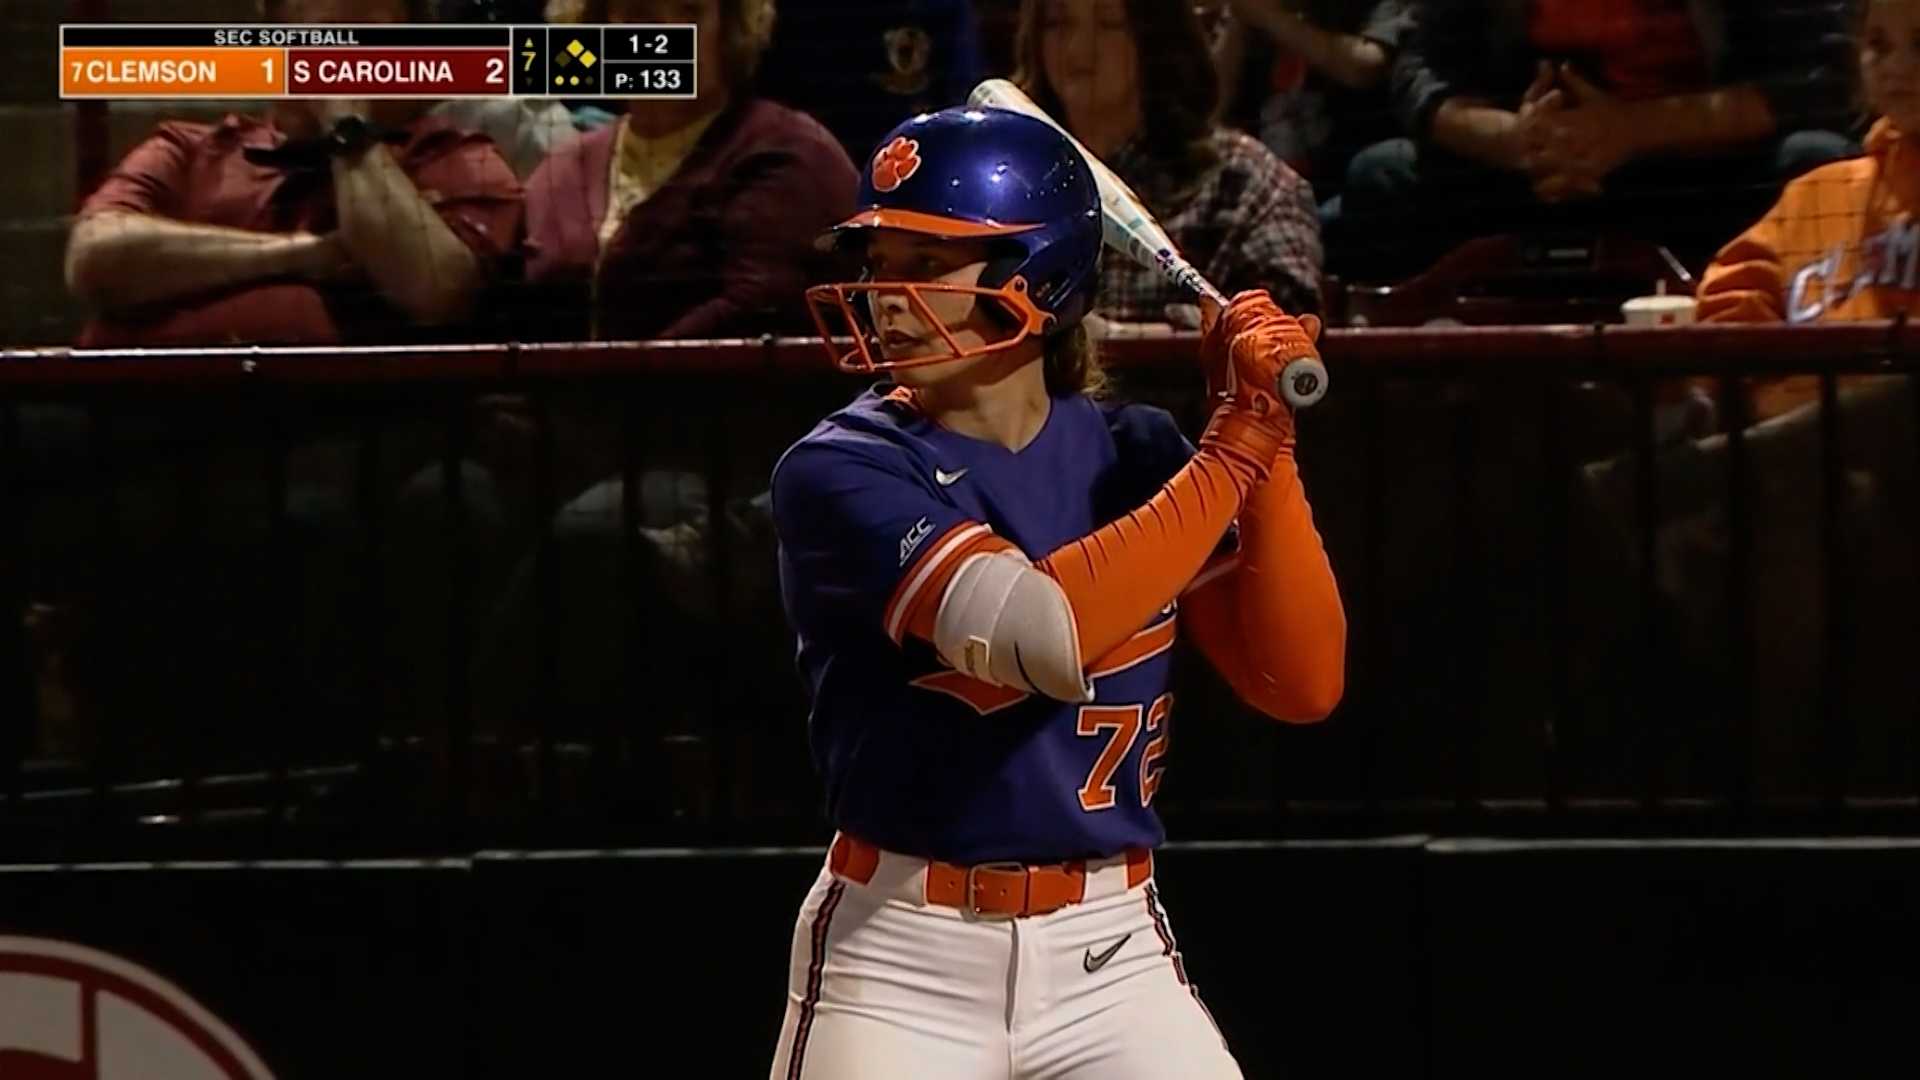 Clemson's Valerie Cagle named USA Softball Collegiate Player of the Year